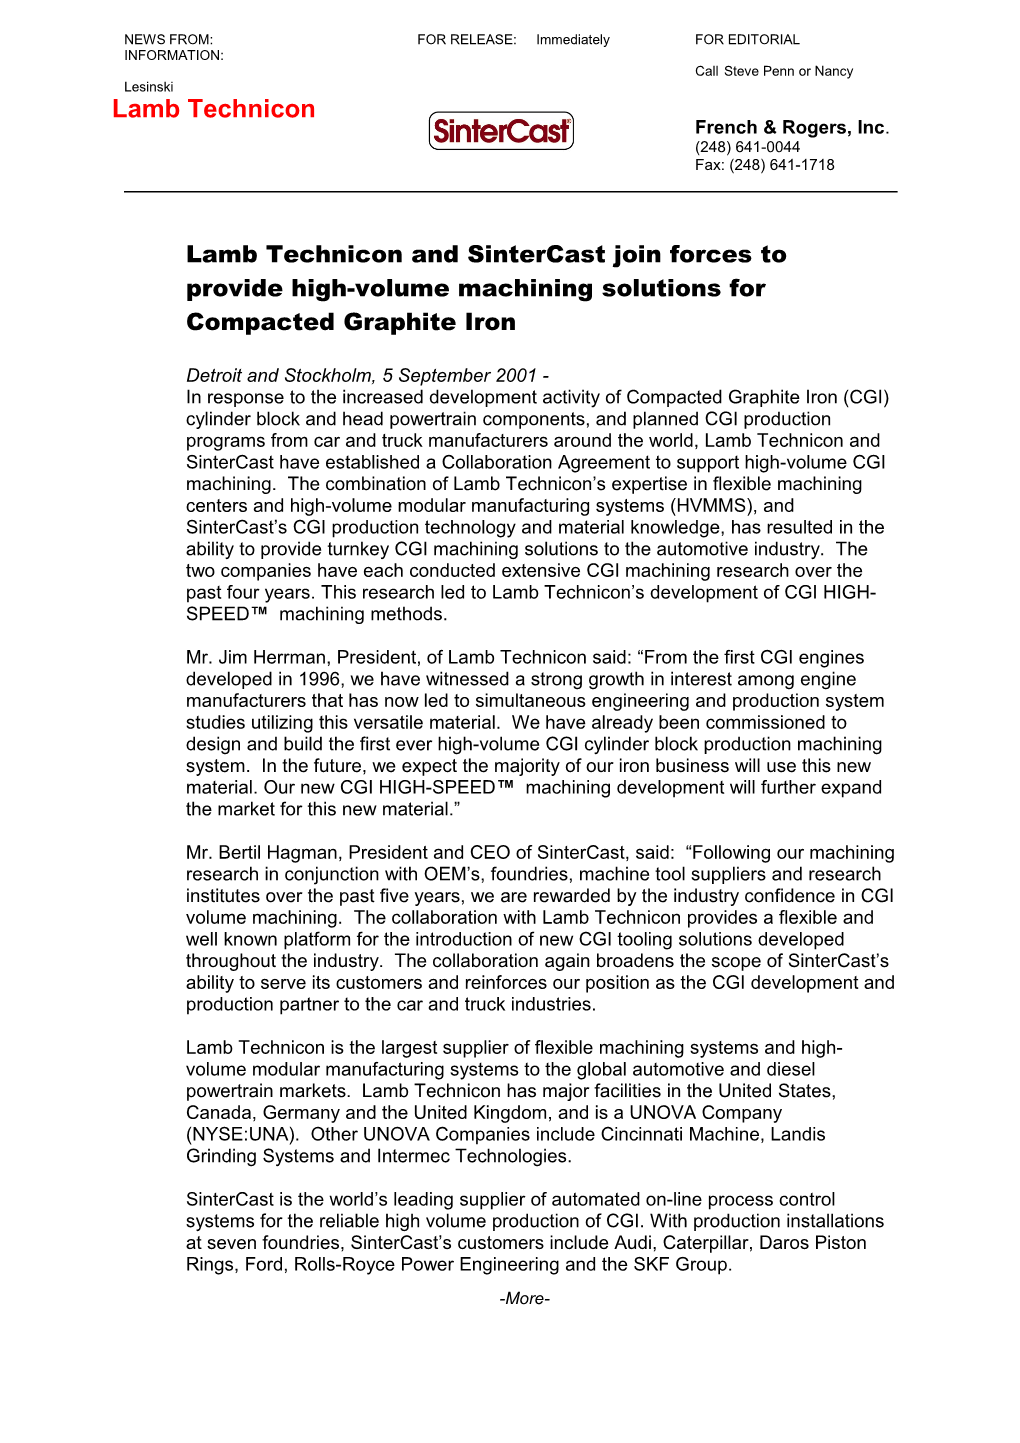 Lamb Technicon and Sintercast Join Forces To